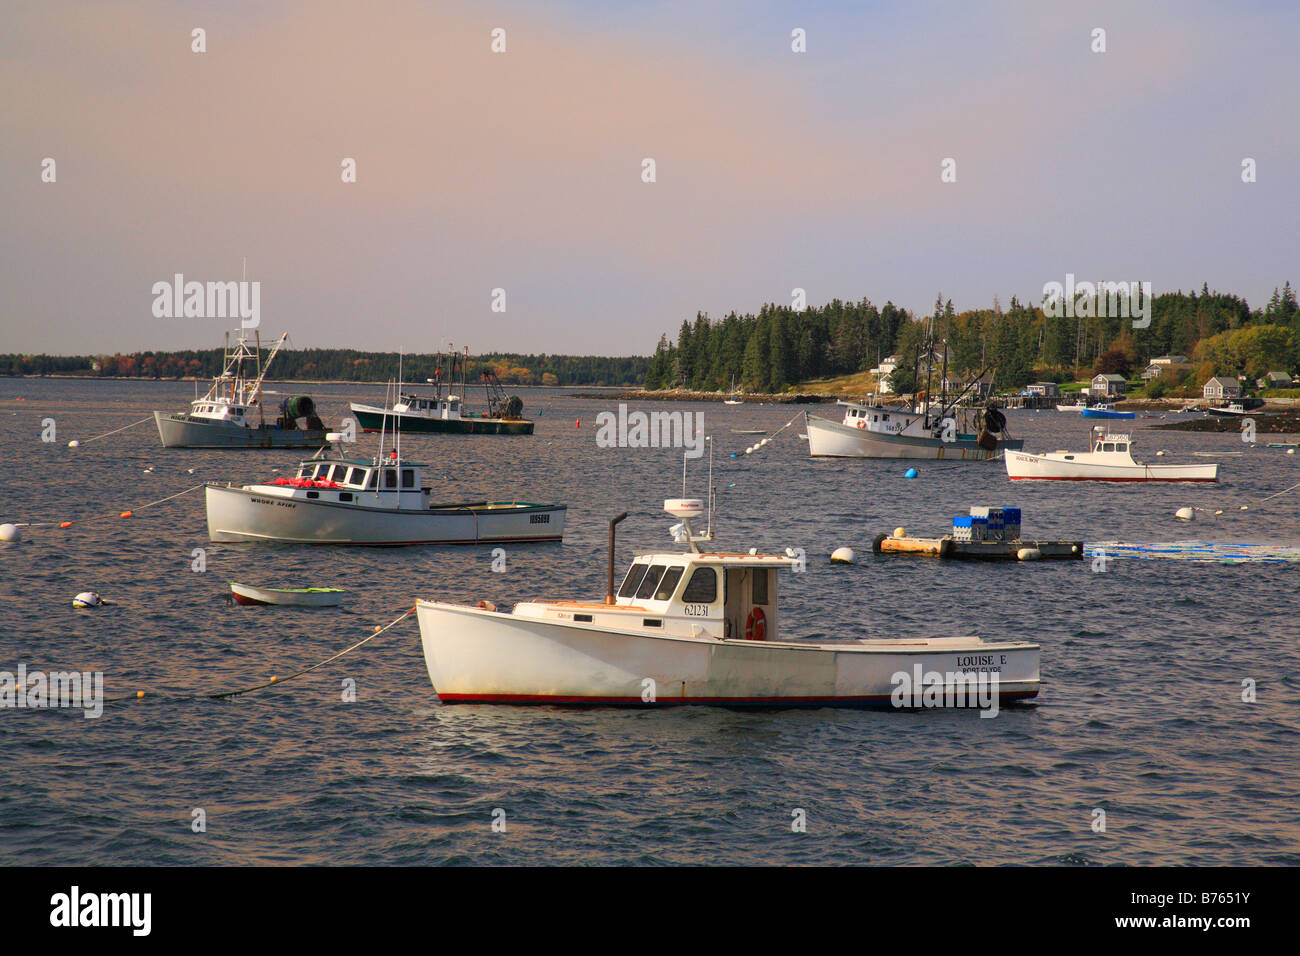 Harbor at Sunset, Port Clyde, Maine, USA Stock Photo